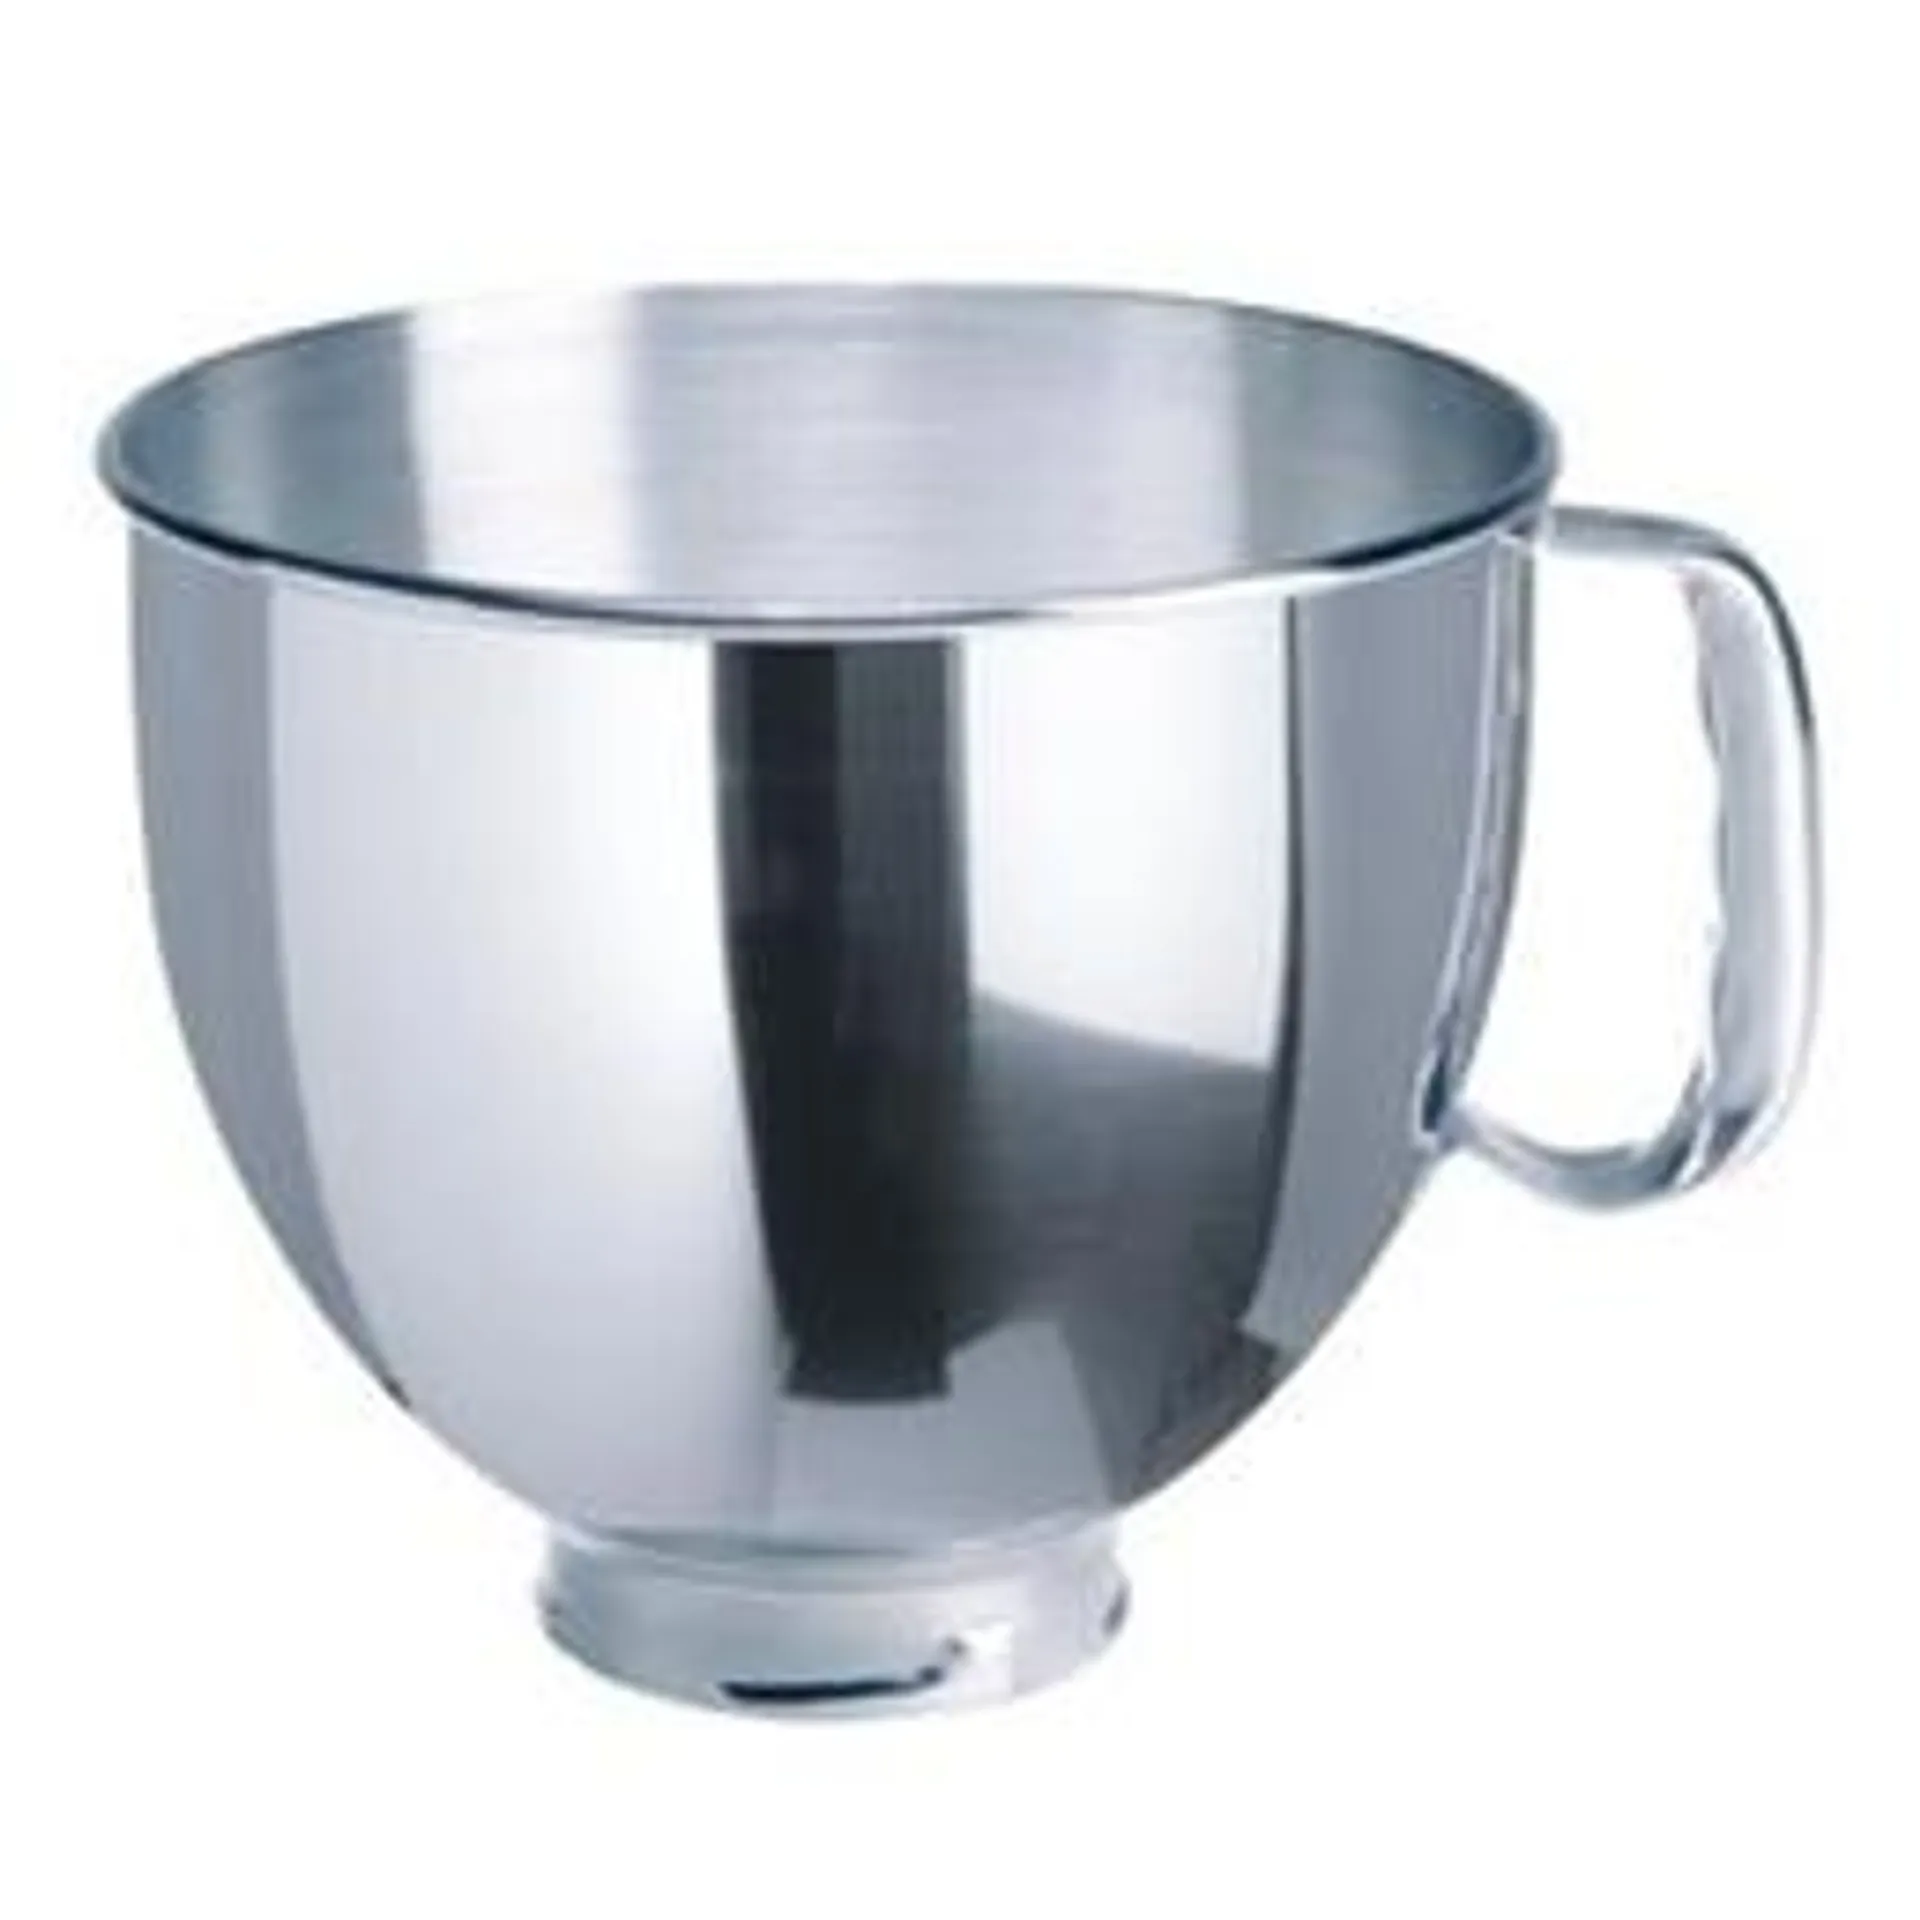 KitchenAid Stainless Bowl with Handle, 4.7L